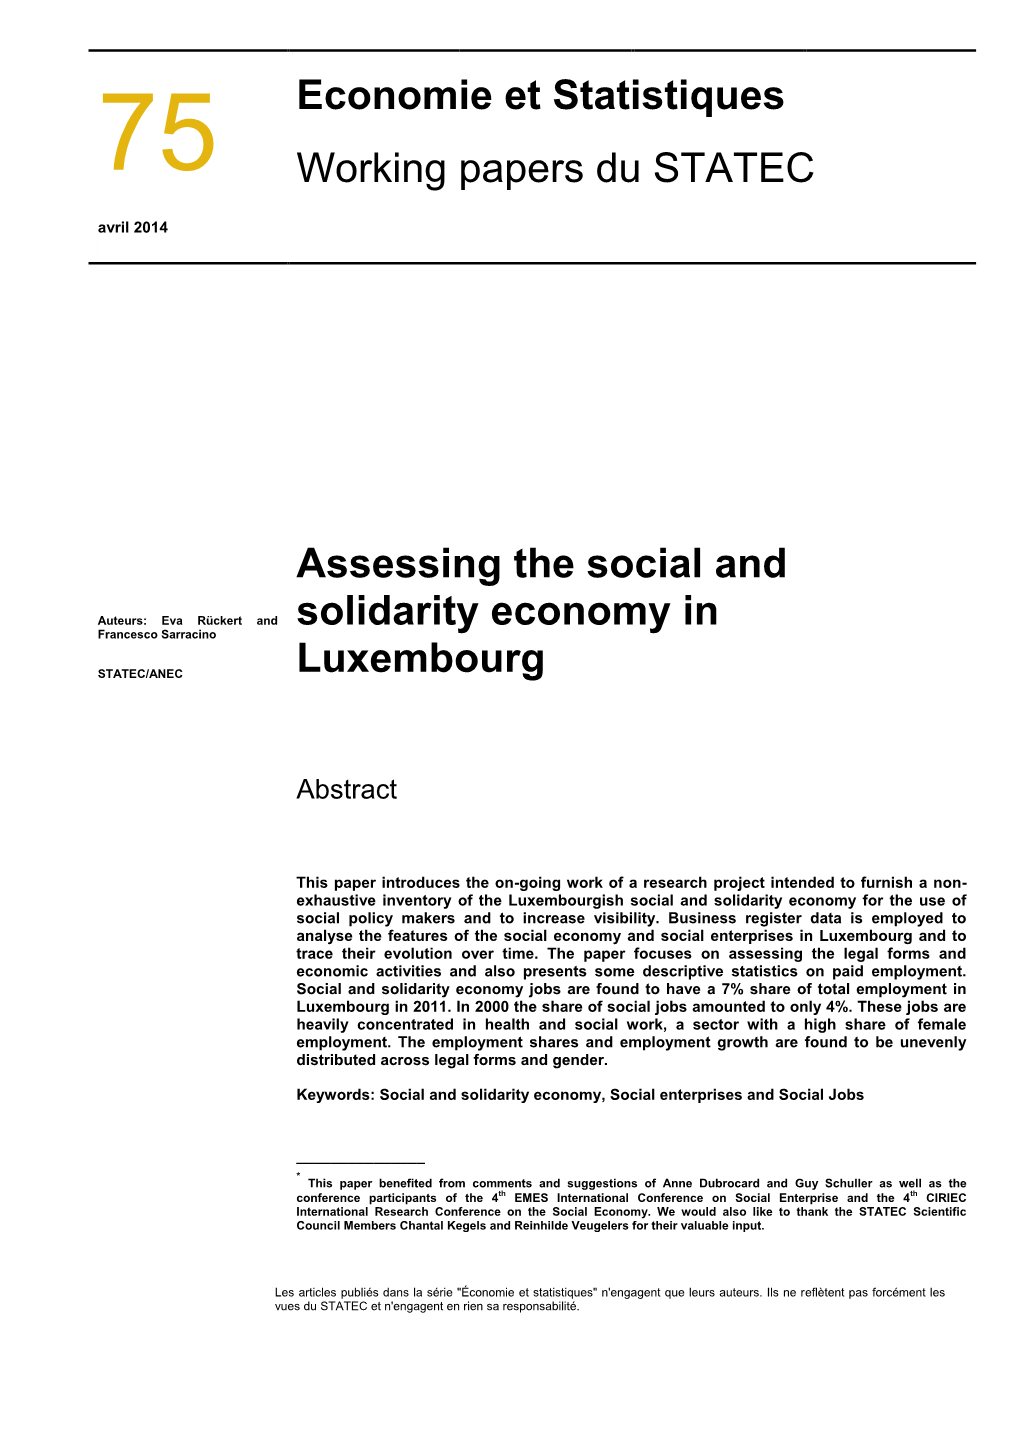 Assessing the Social and Solidarity Economy in Luxembourg Statistiques Working Papers Du STATEC N° 75 Avril 2014